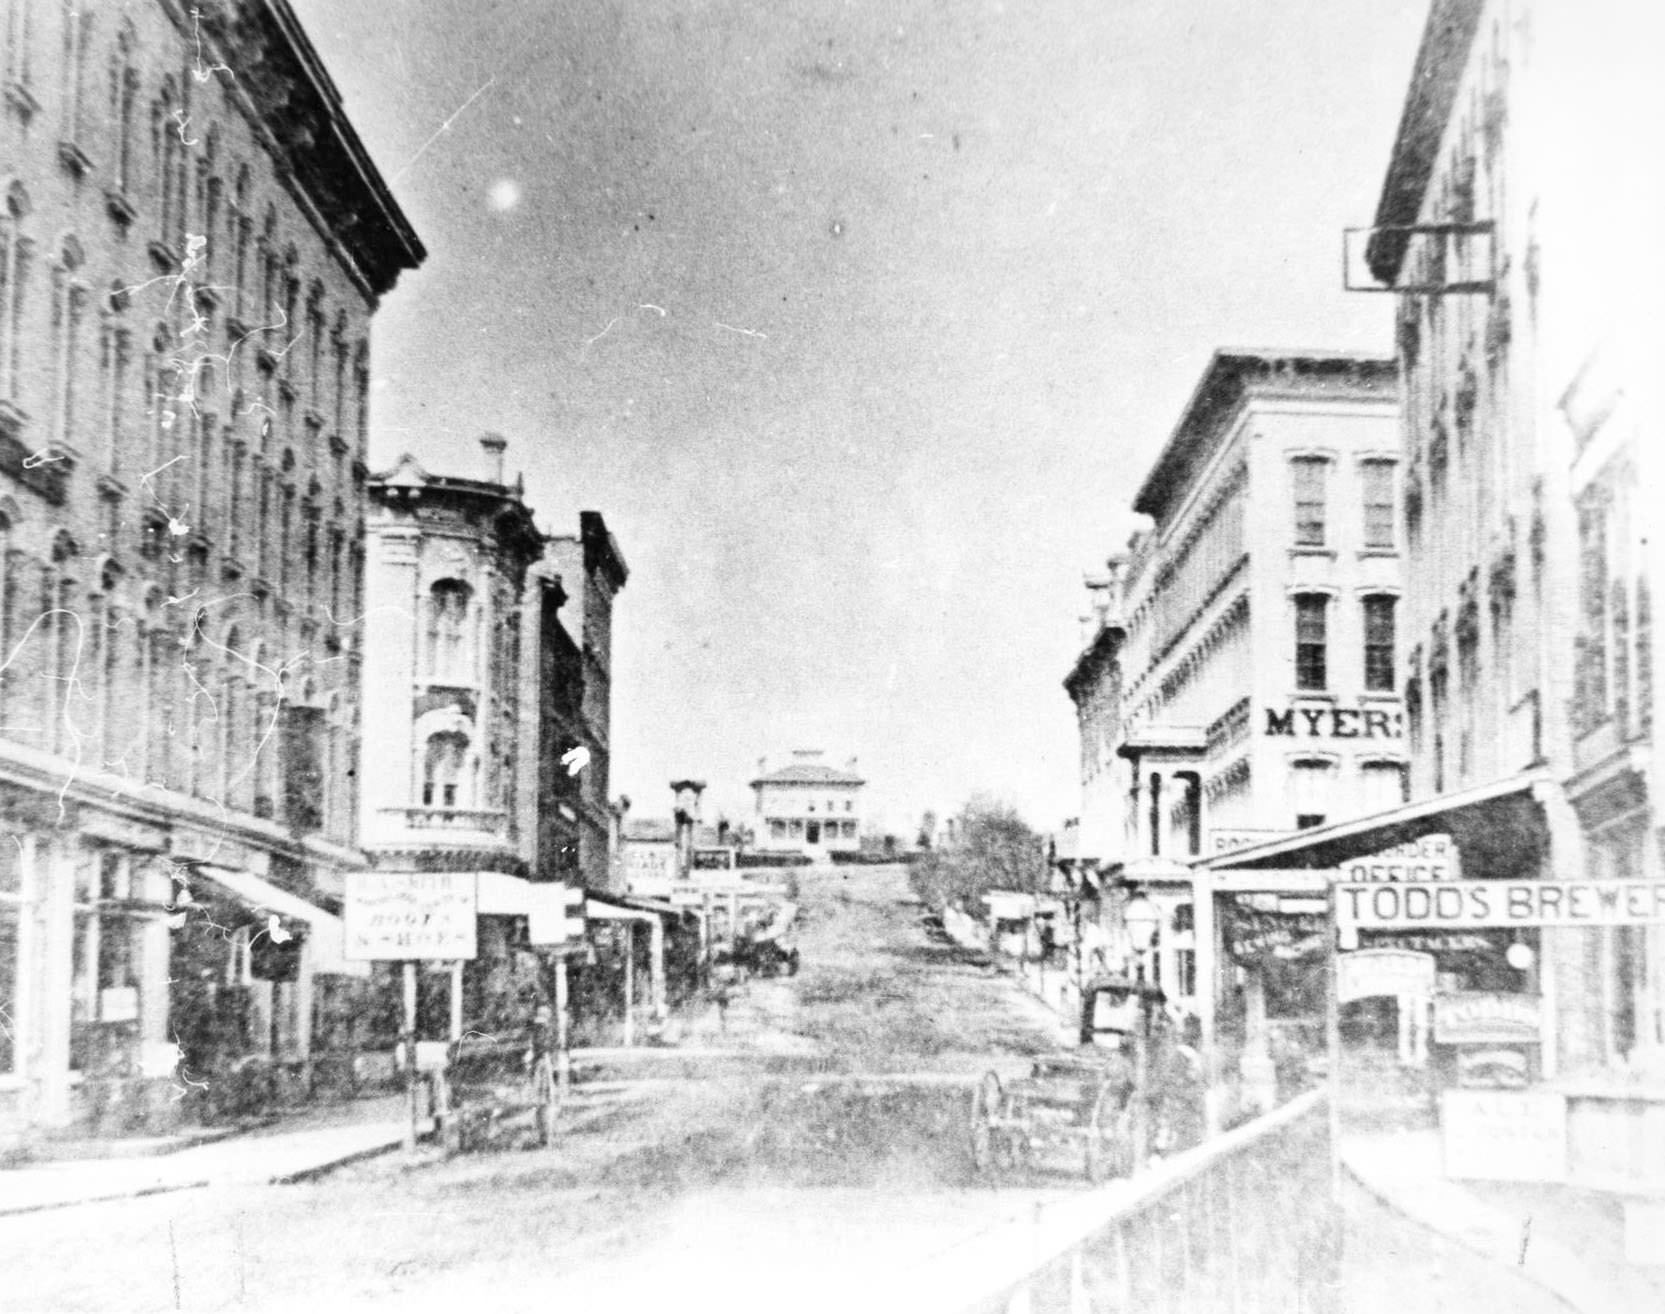 Myers House Hotel and Todd's Brewery on Milwaukee Street, 1875